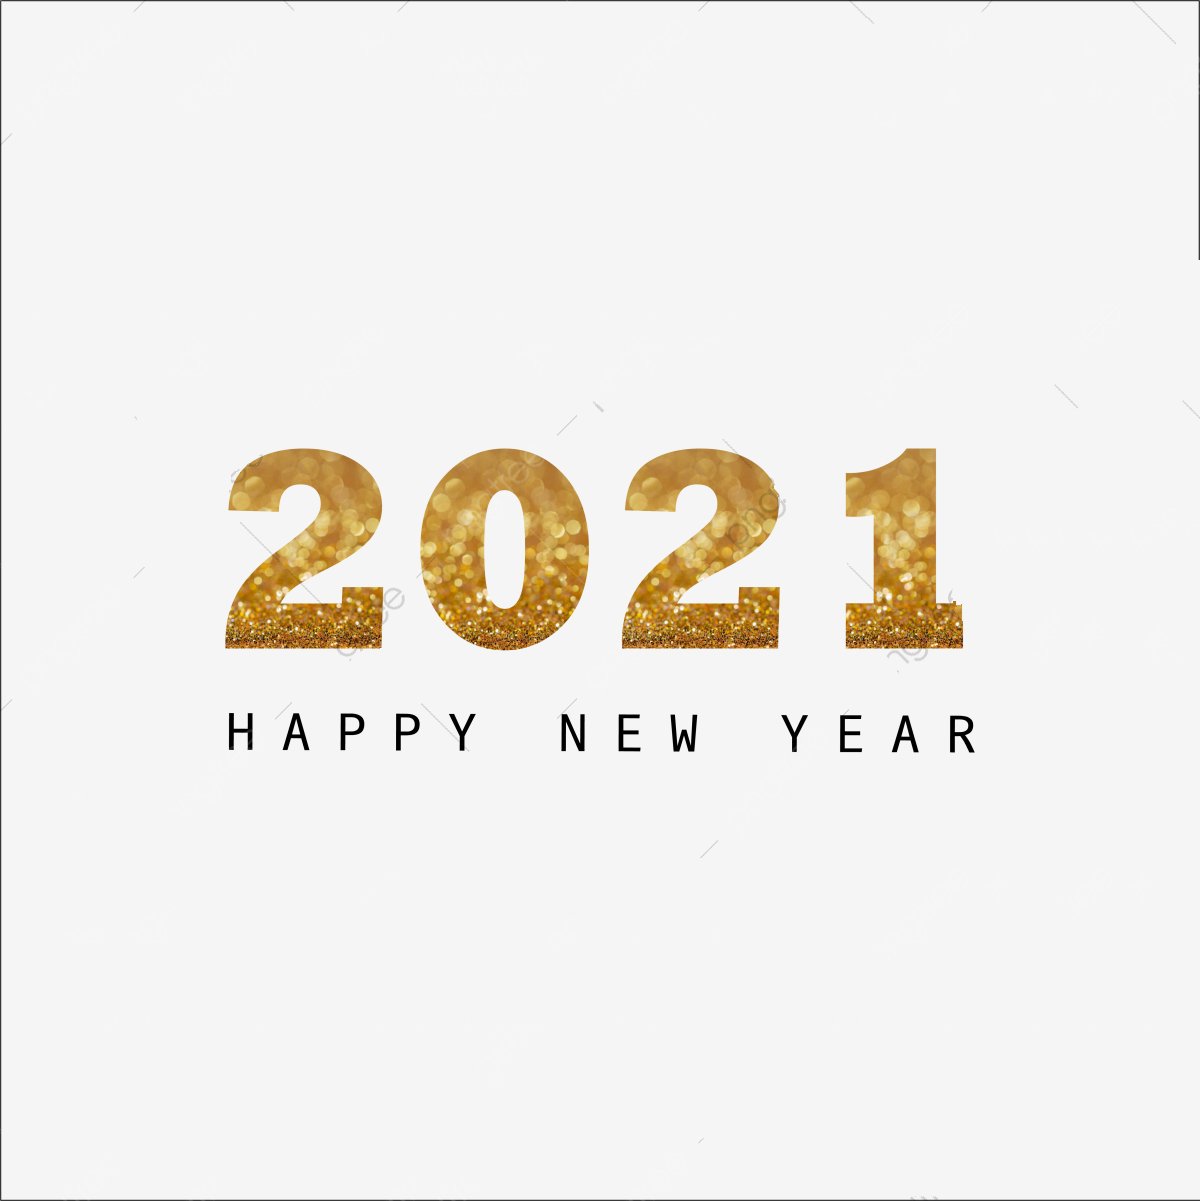 pngtree-happy-new-year-2021-png-image_5330562.jpg